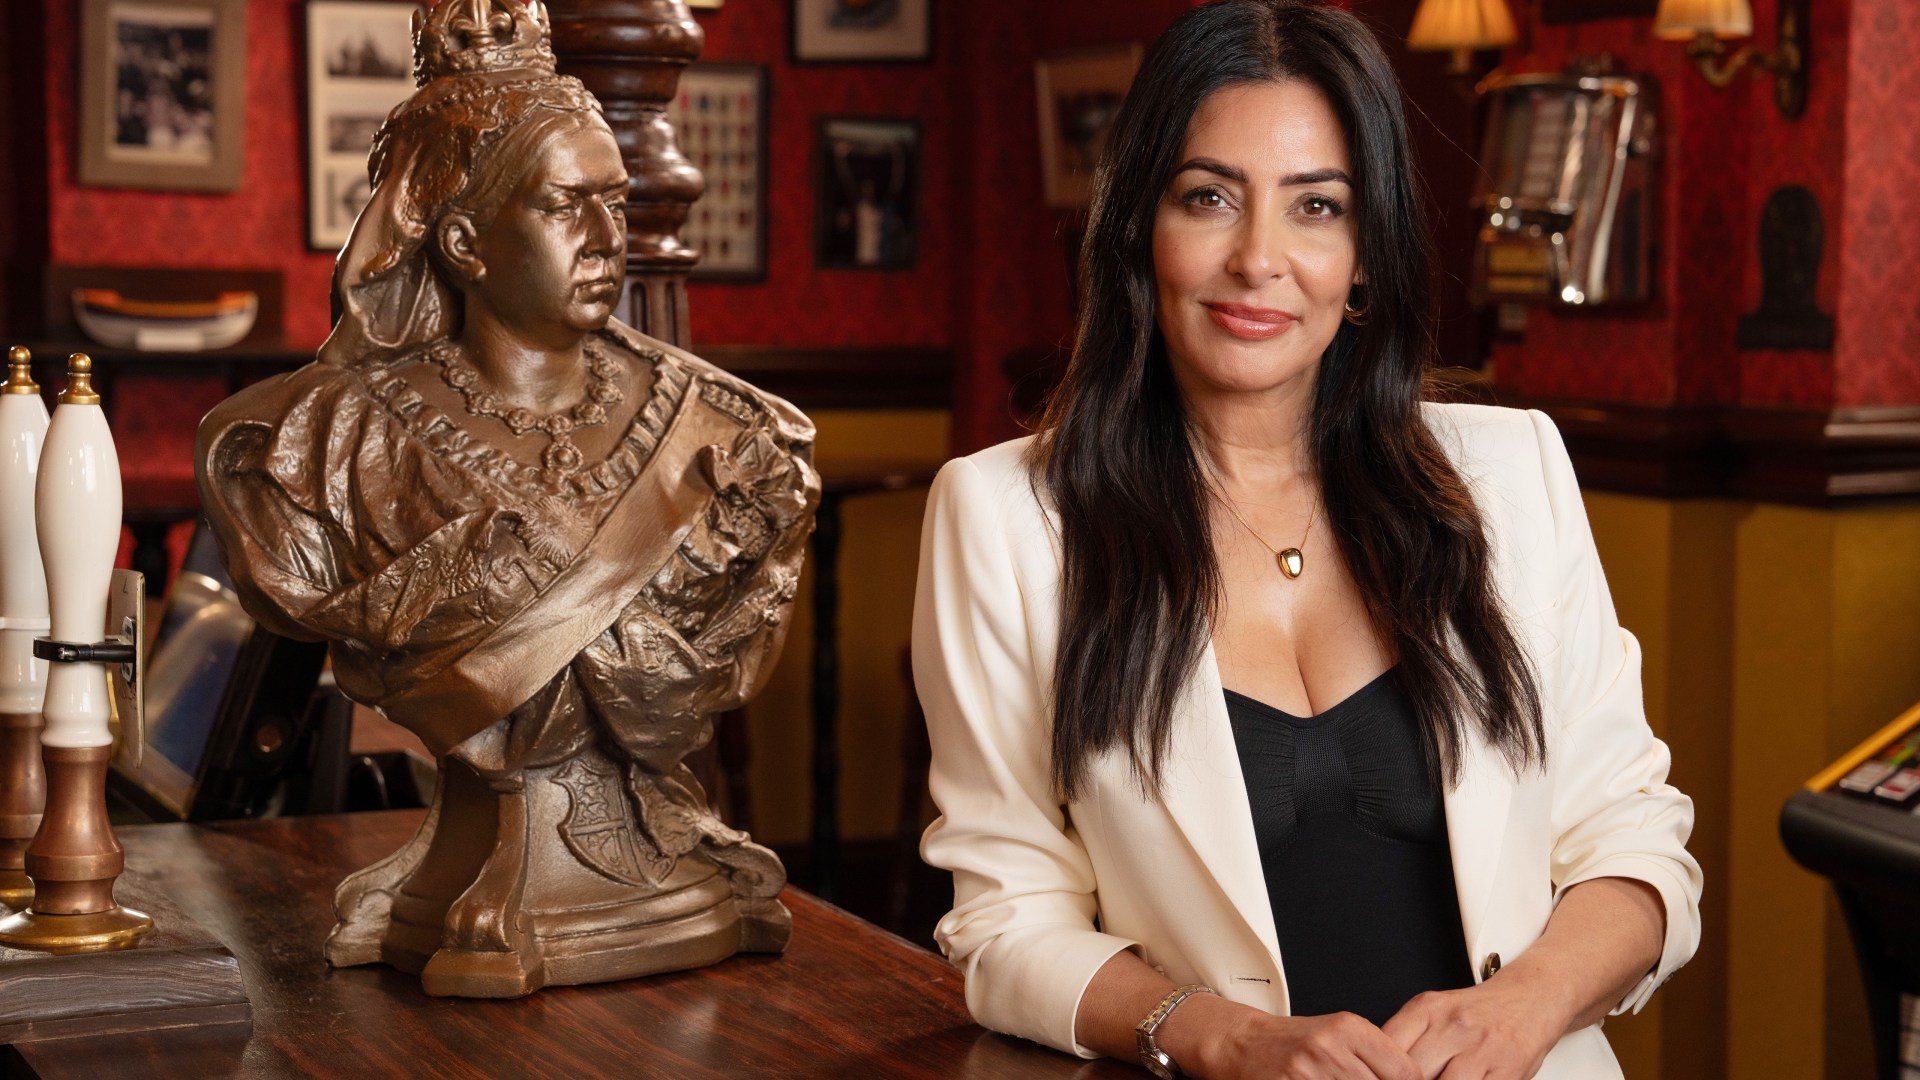 EastEnders signs Strictly star Laila Rouass for steamy new storyline [Video]